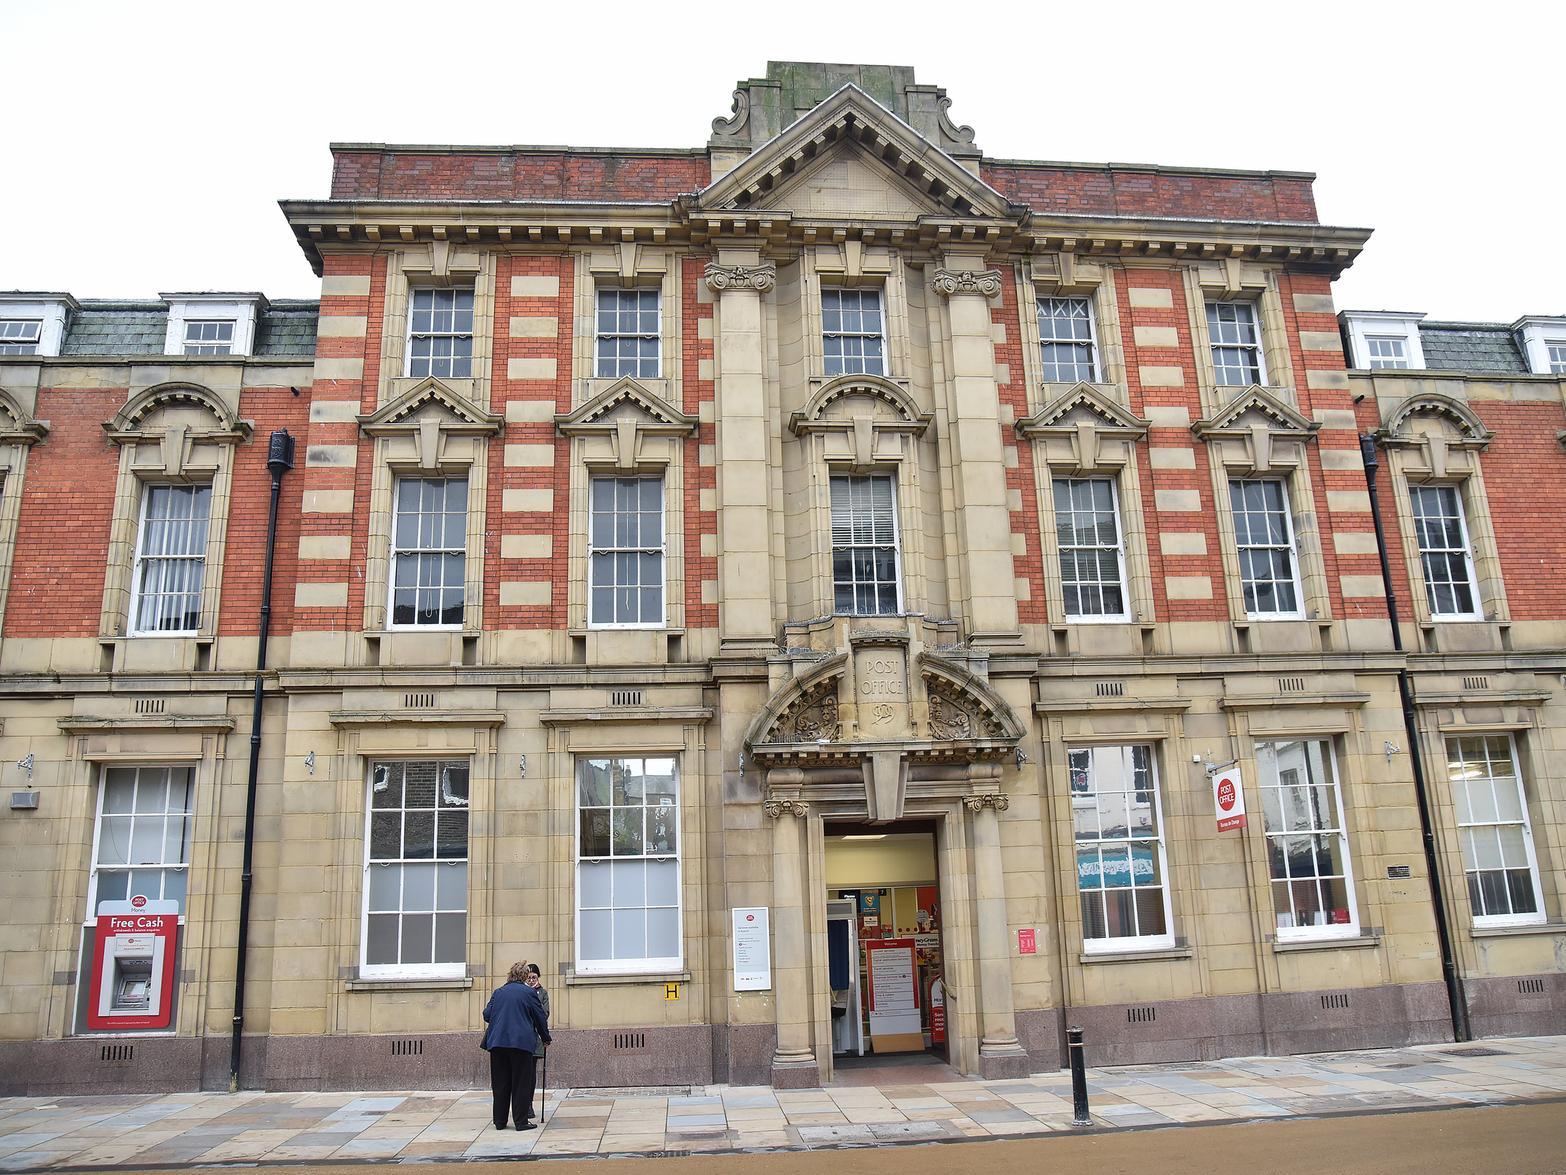 Scarborough's former Crown Post Office is now lying empty after post office services were moved into WH Smith last year.